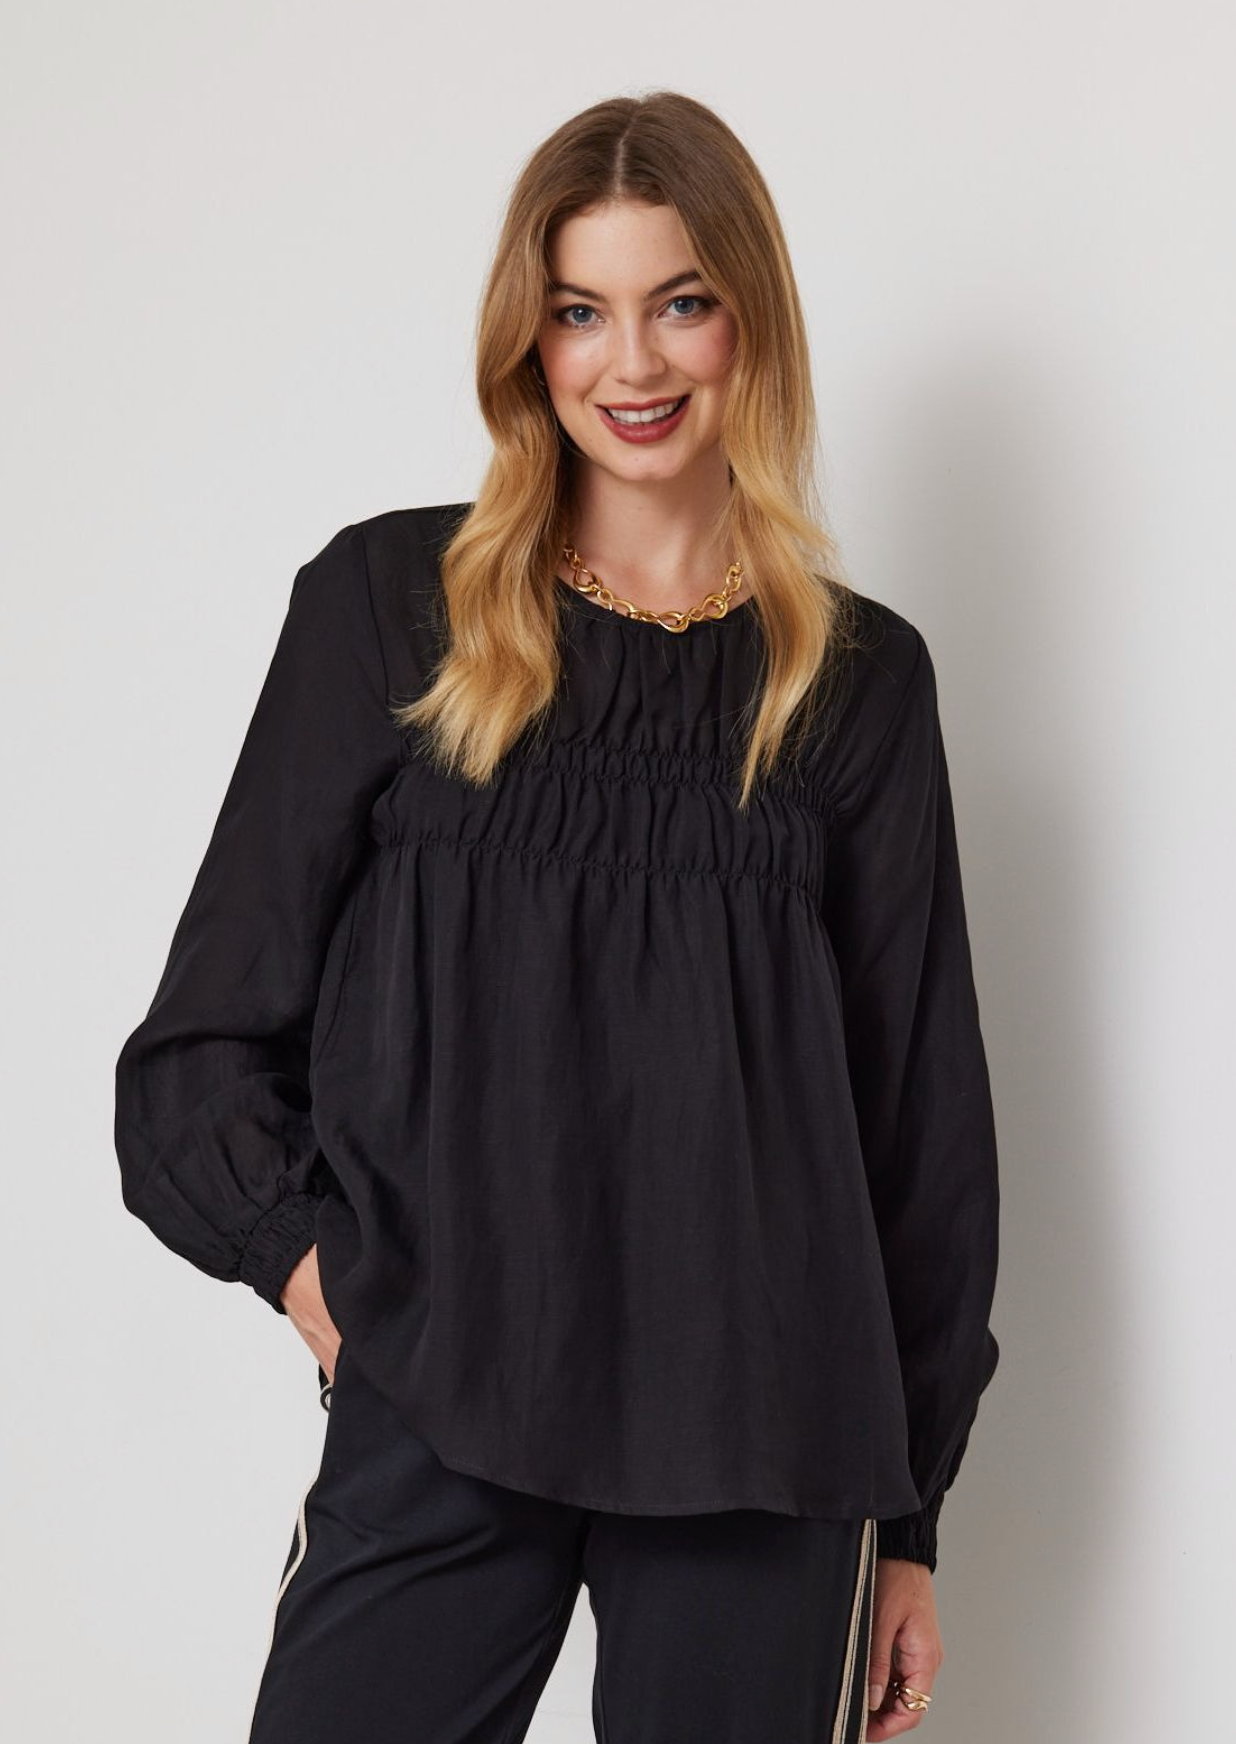 DUO MELINE SHIRRED TOP - BLACK - THE VOGUE STORE